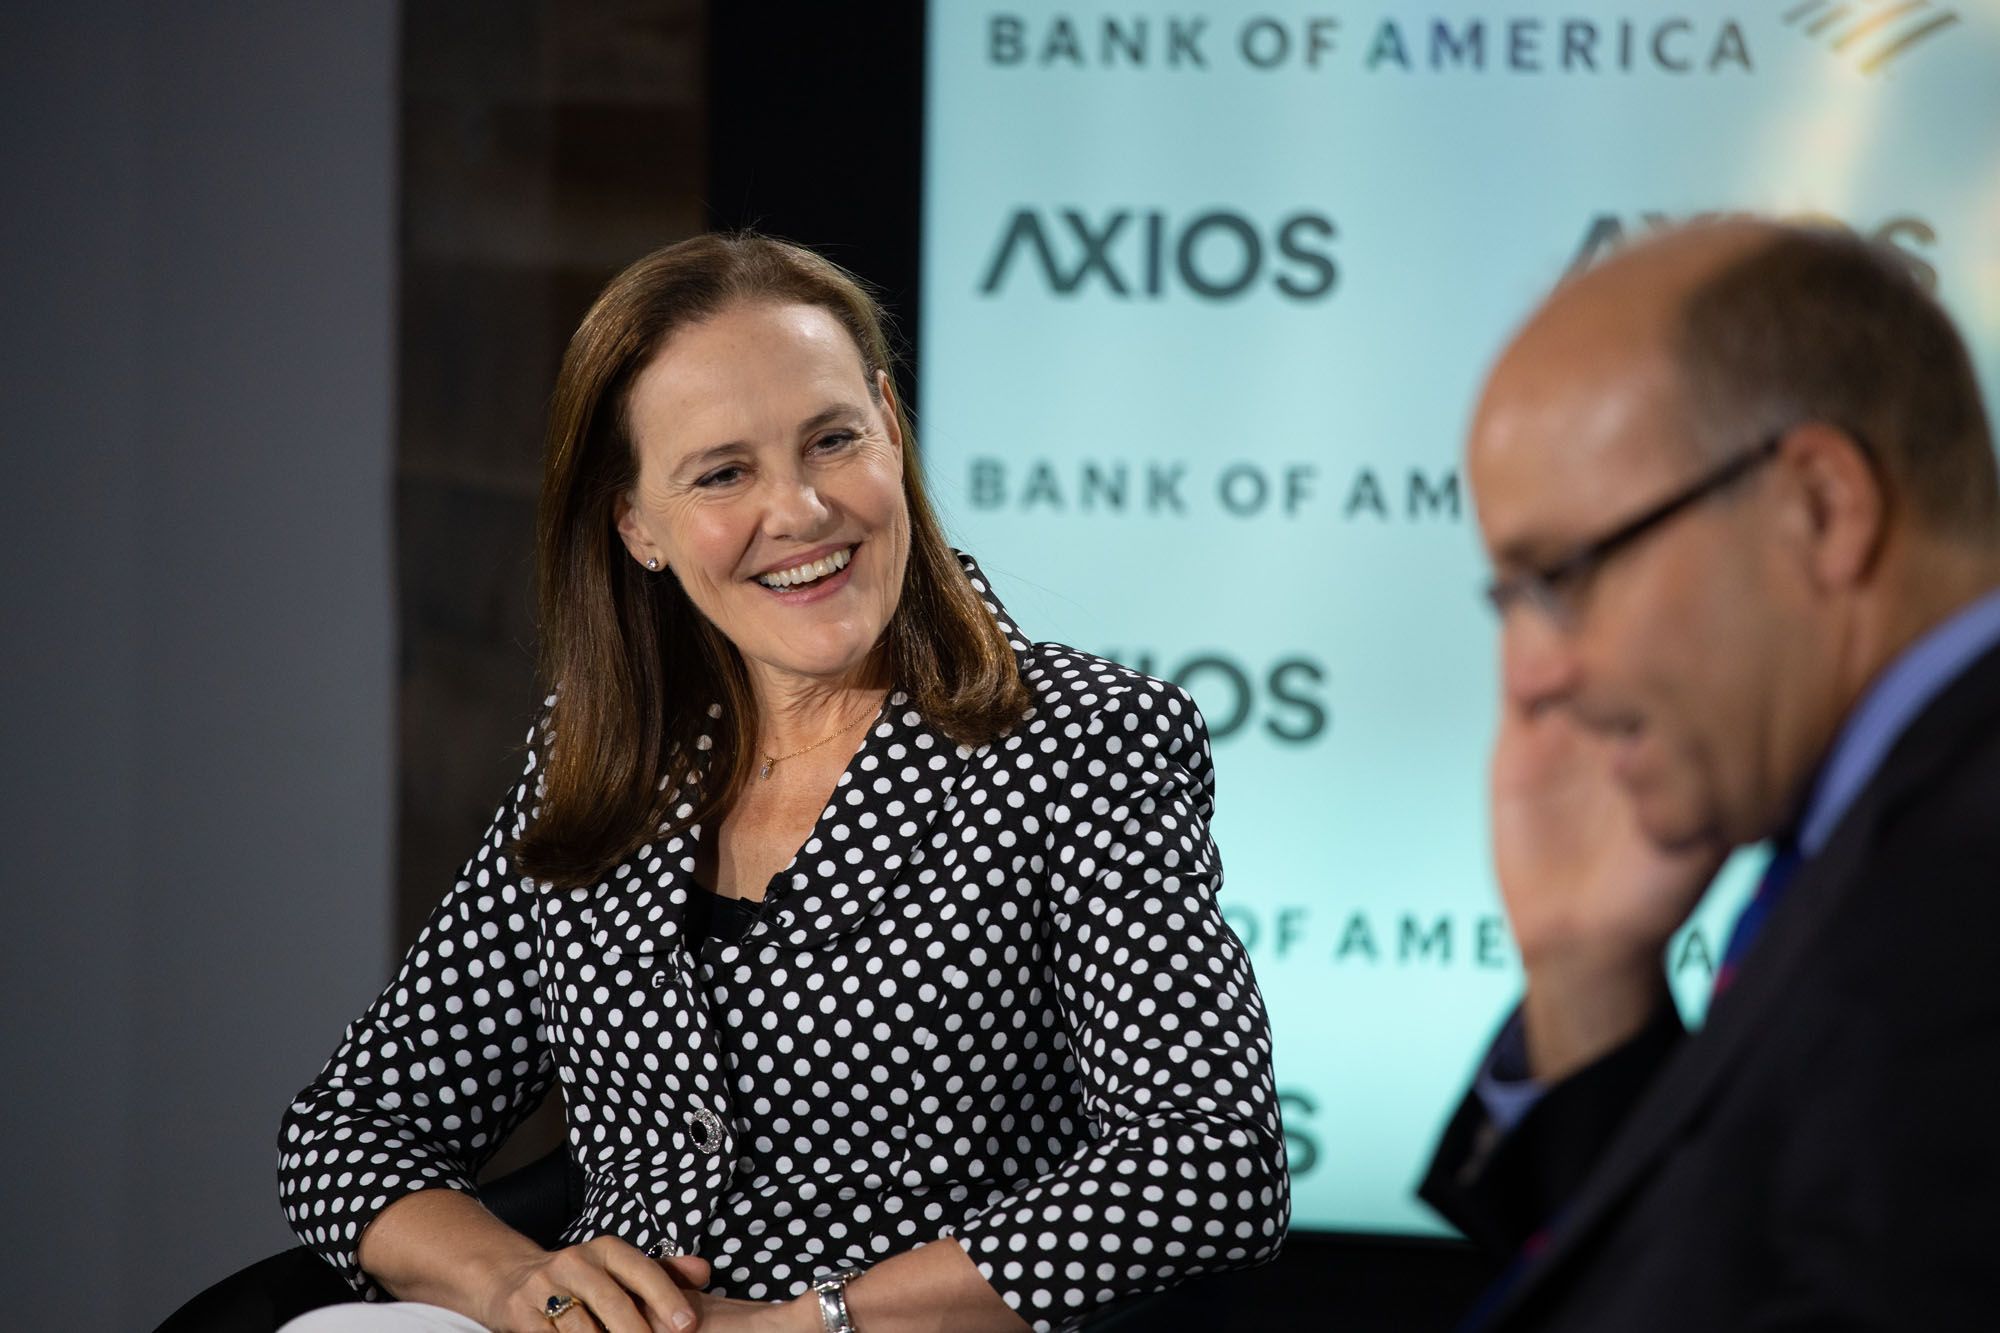 Former Under Secretary of Defense for Policy Michèle Flournoy on the Axios stage. 